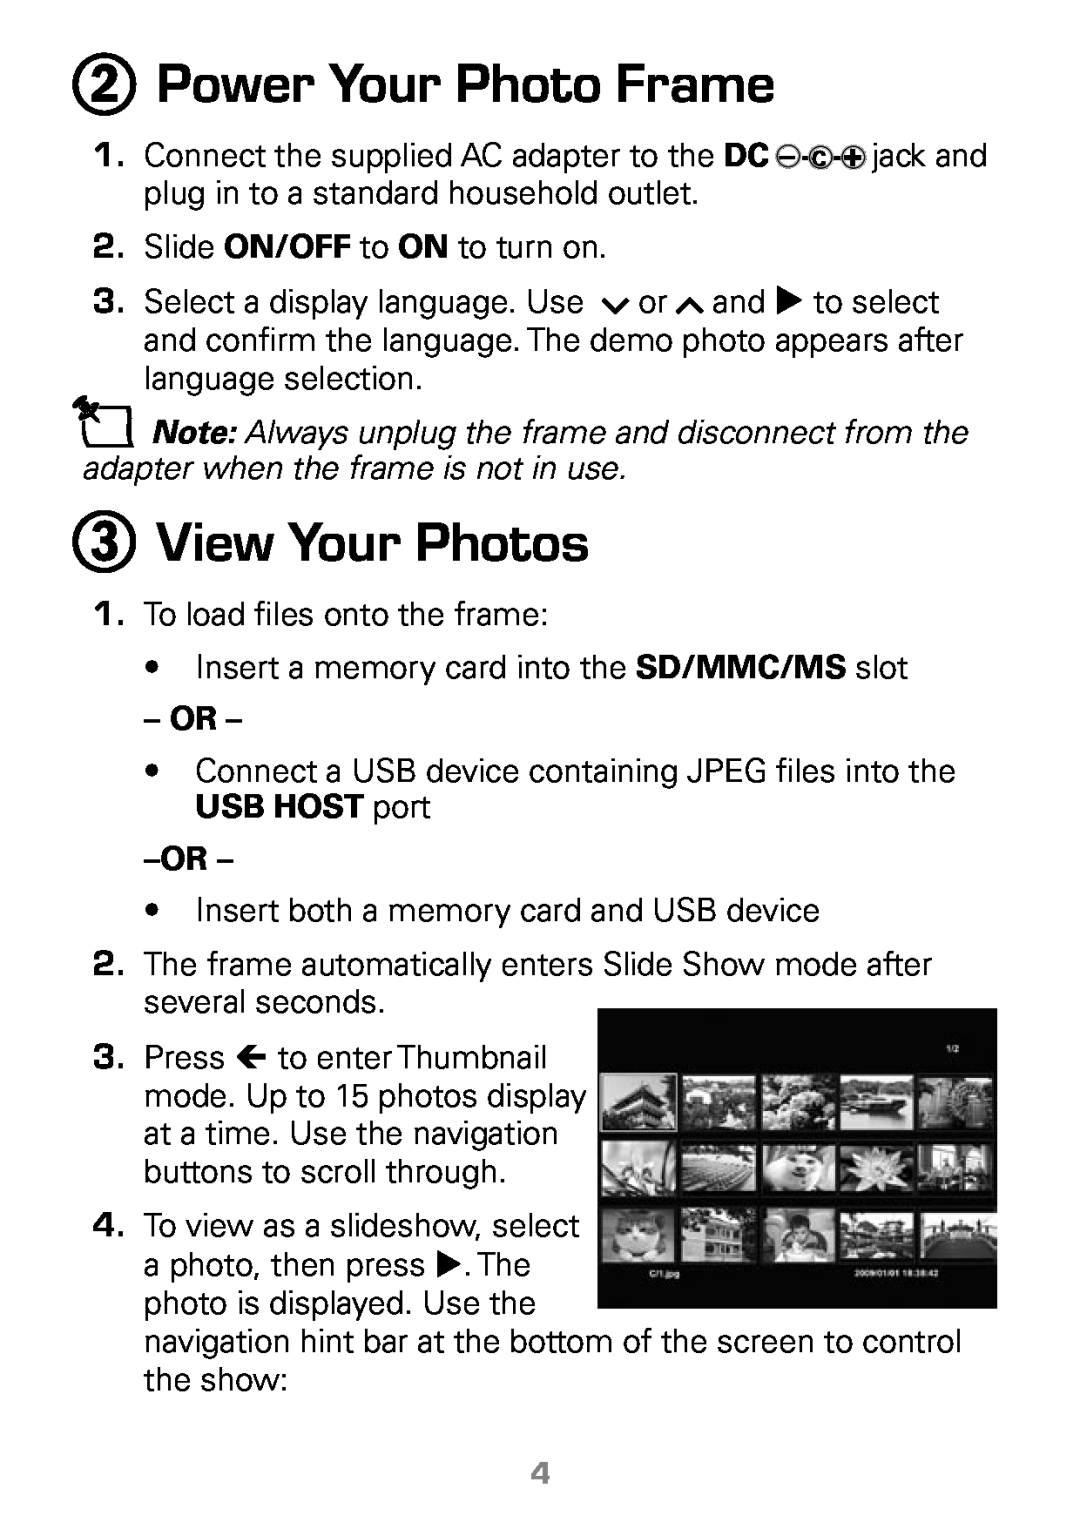 Radio Shack 16-1003 manual Power Your Photo Frame, View Your Photos 